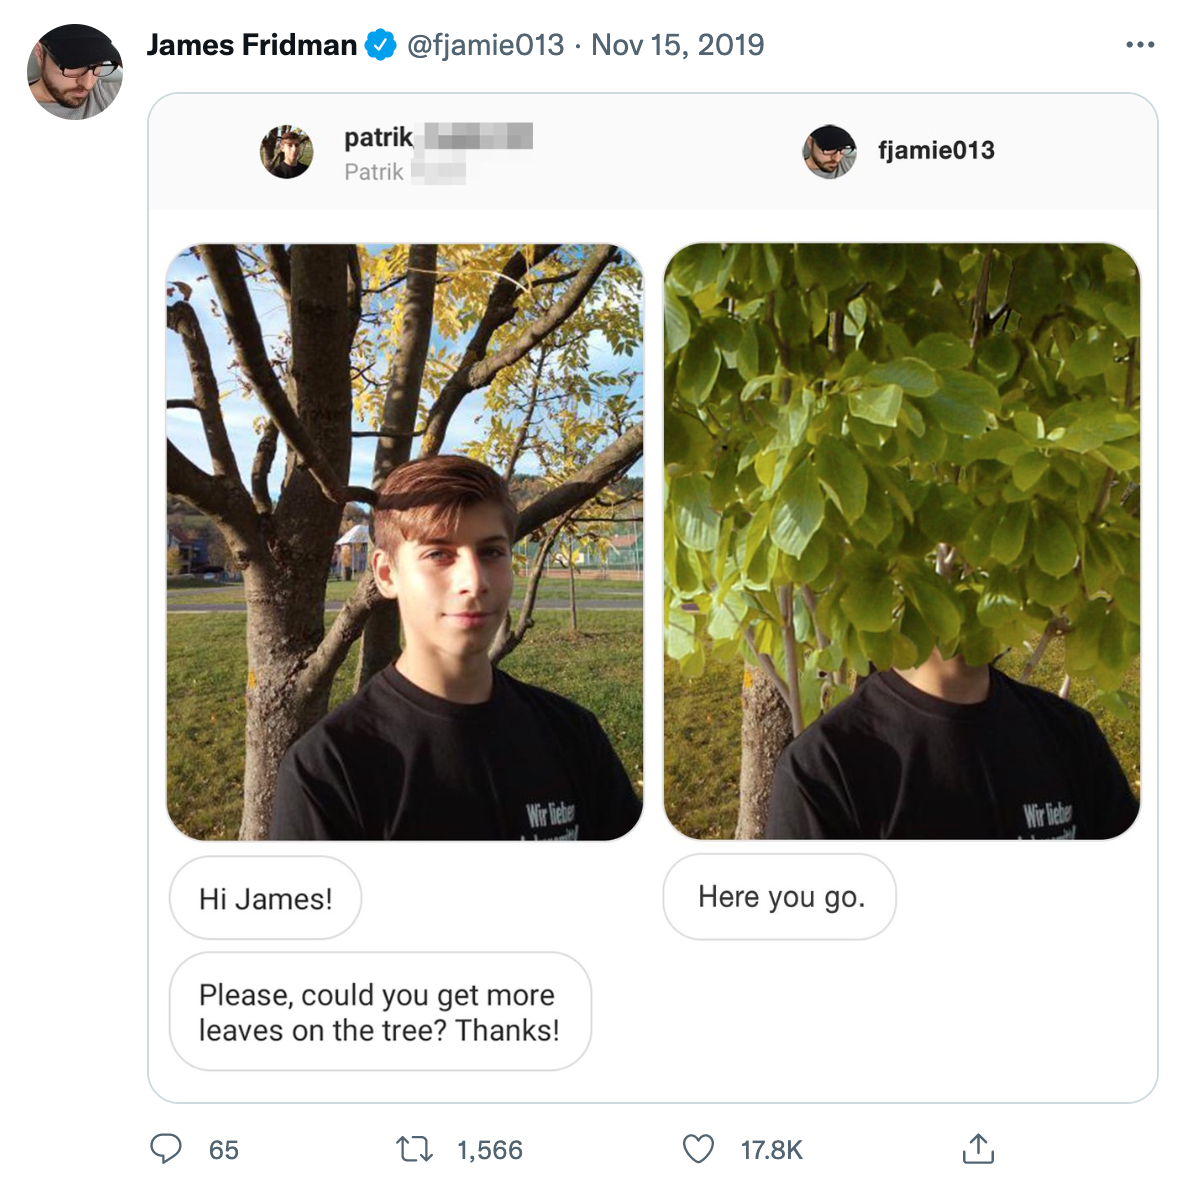 wholesome photoshop edits - james fridman photoshop - James Fridman O Hi James! patrik Patrik Please, could you get more leaves on the tree? Thanks! 65 1,566 Here you go. fjamie013